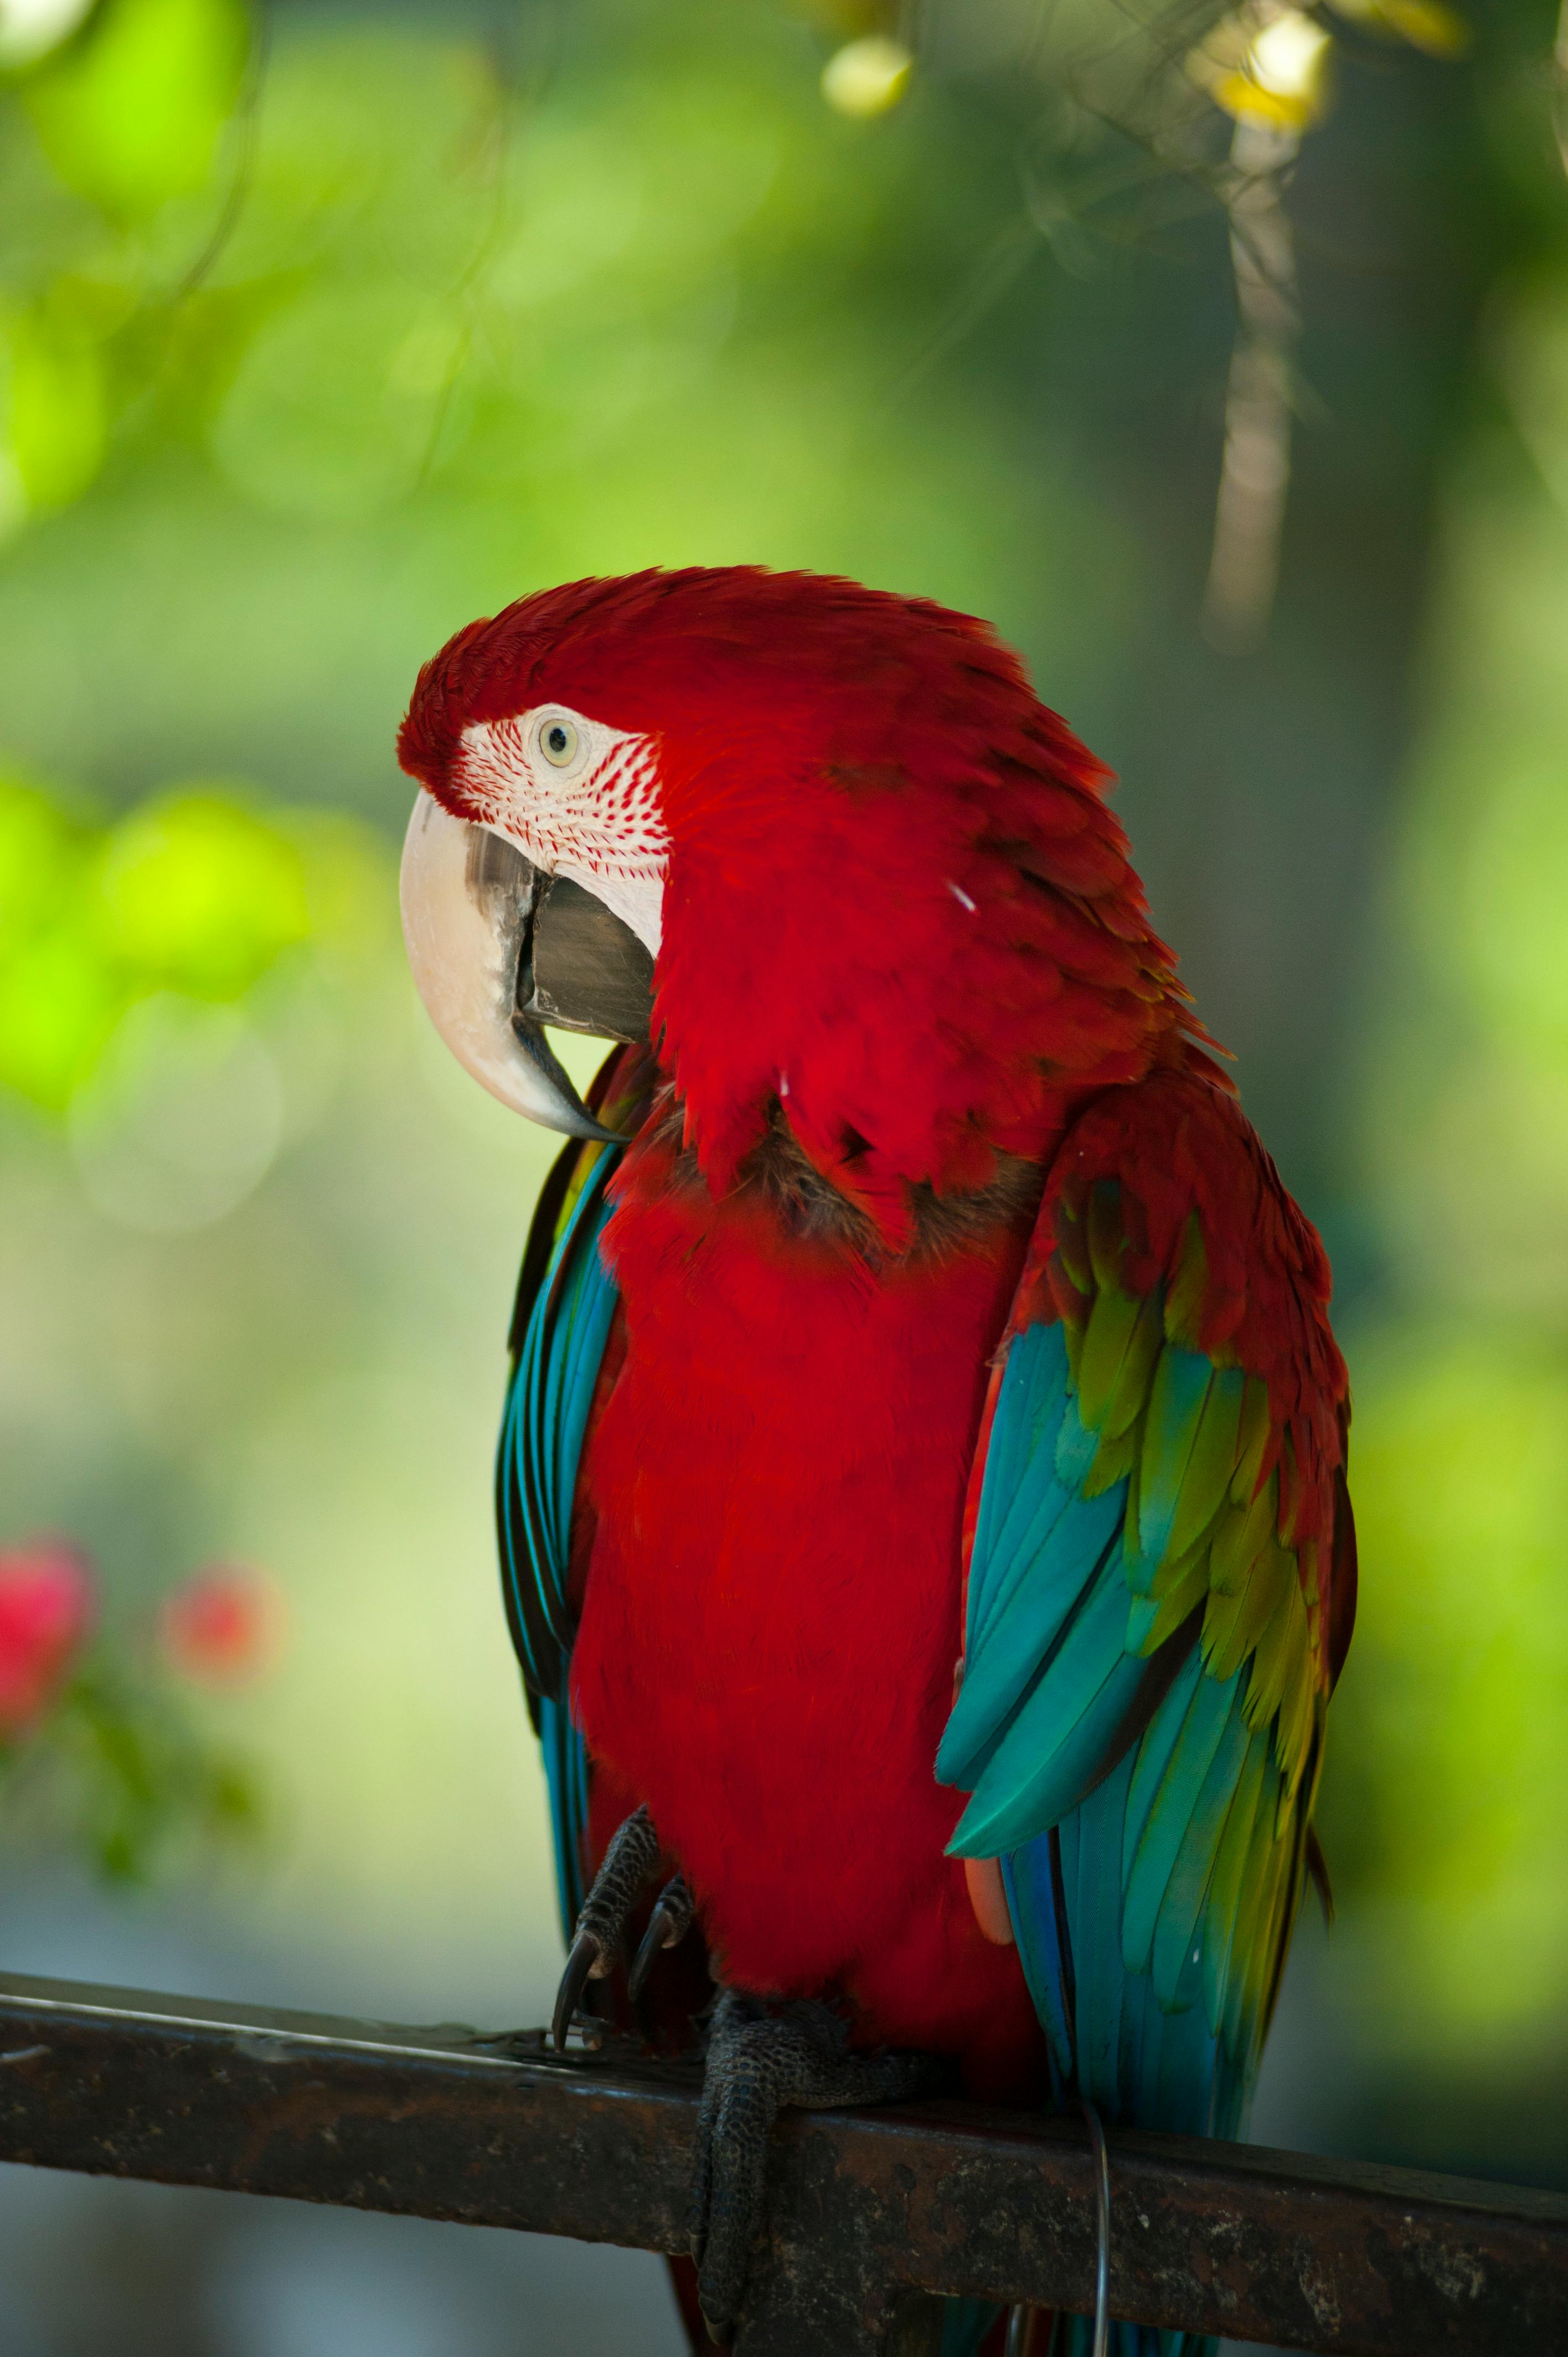 Scarlet Macaw Photos, Download The BEST Free Scarlet Macaw Stock